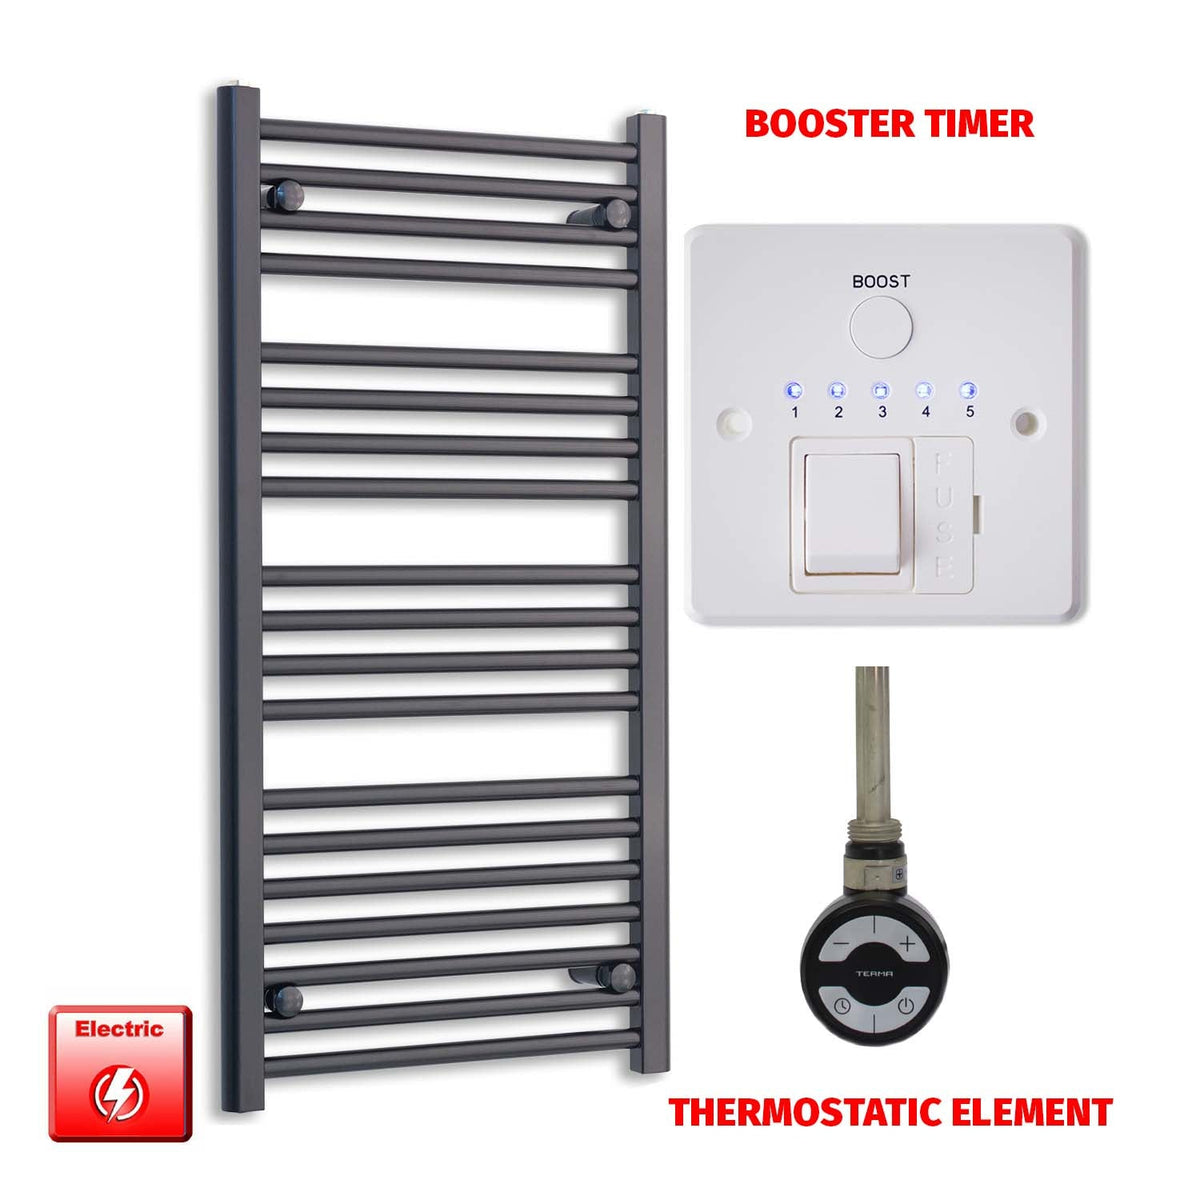 1000mm High 500mm Wide Flat Black Pre-Filled Electric Heated Towel Rail Radiator HTR MOA Thermostatic Booster Timer